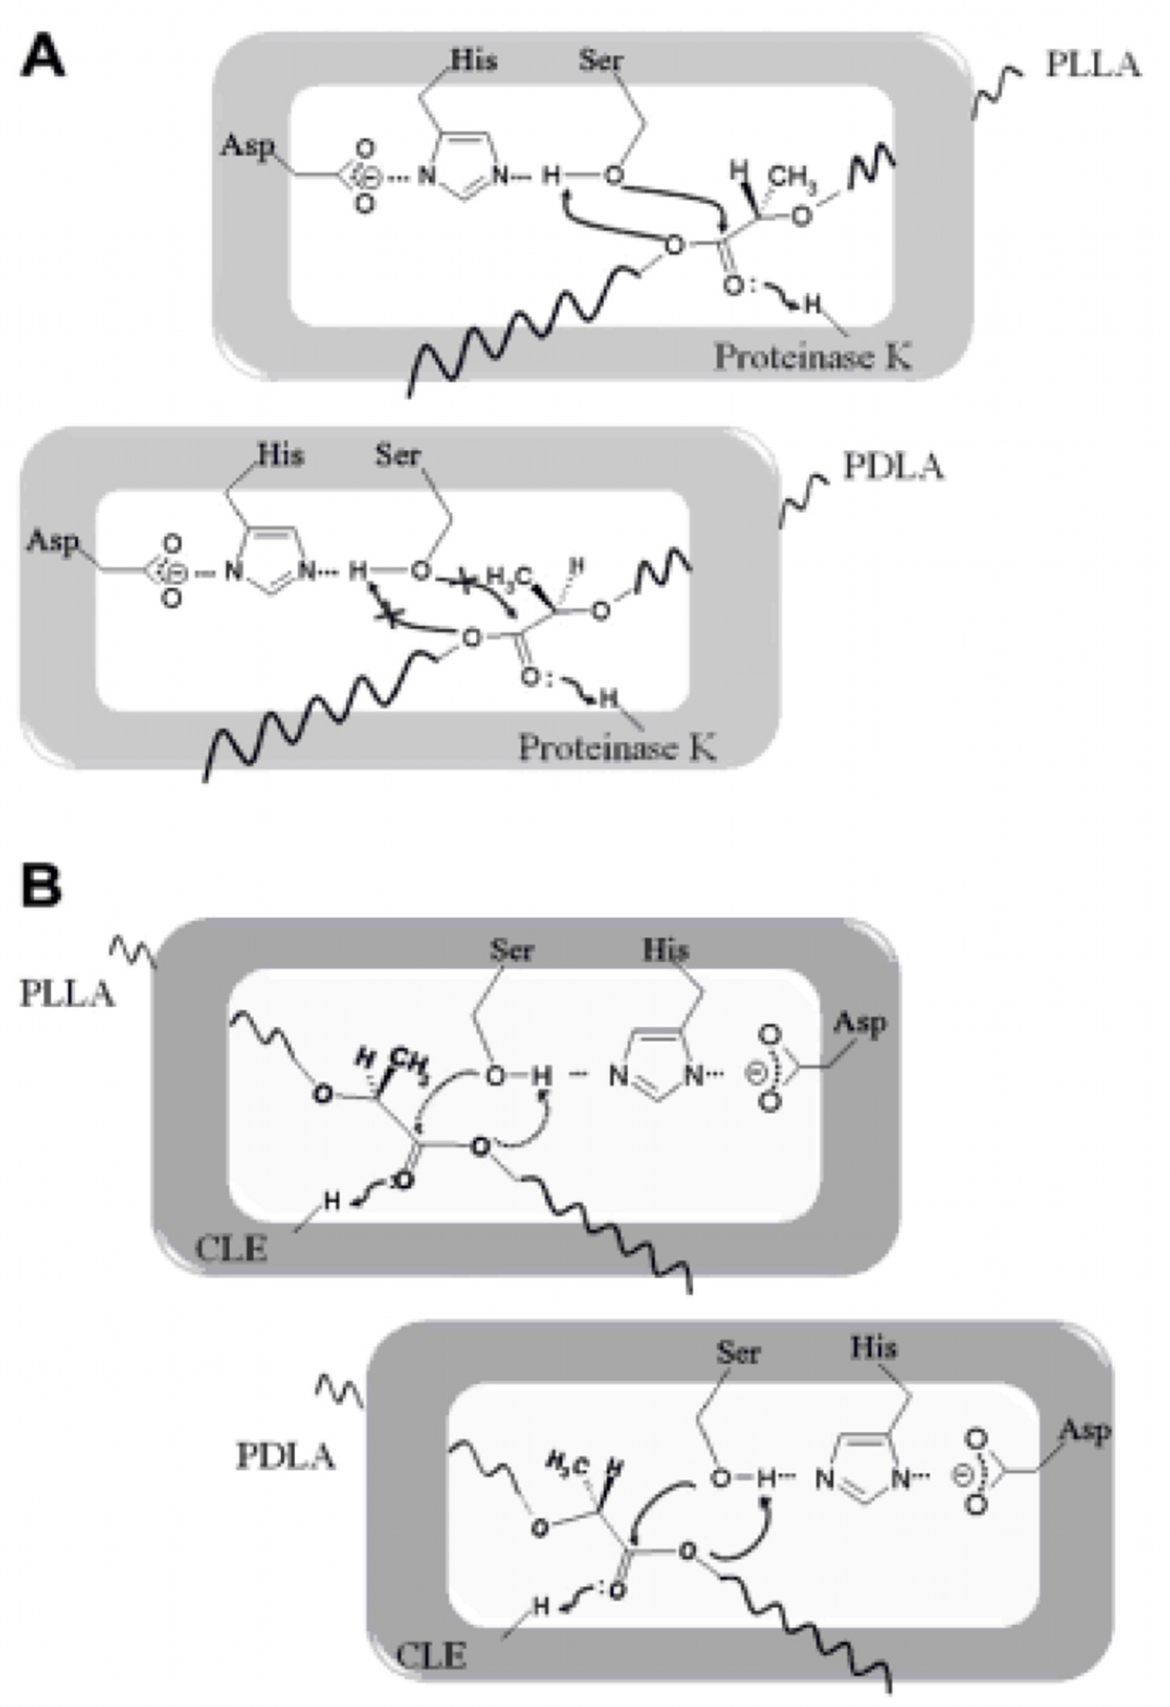 ProteinaseK and CLE, Poly lactic acid (PLA) degradation mechanisms. Adapted from Kawai et. al 2011